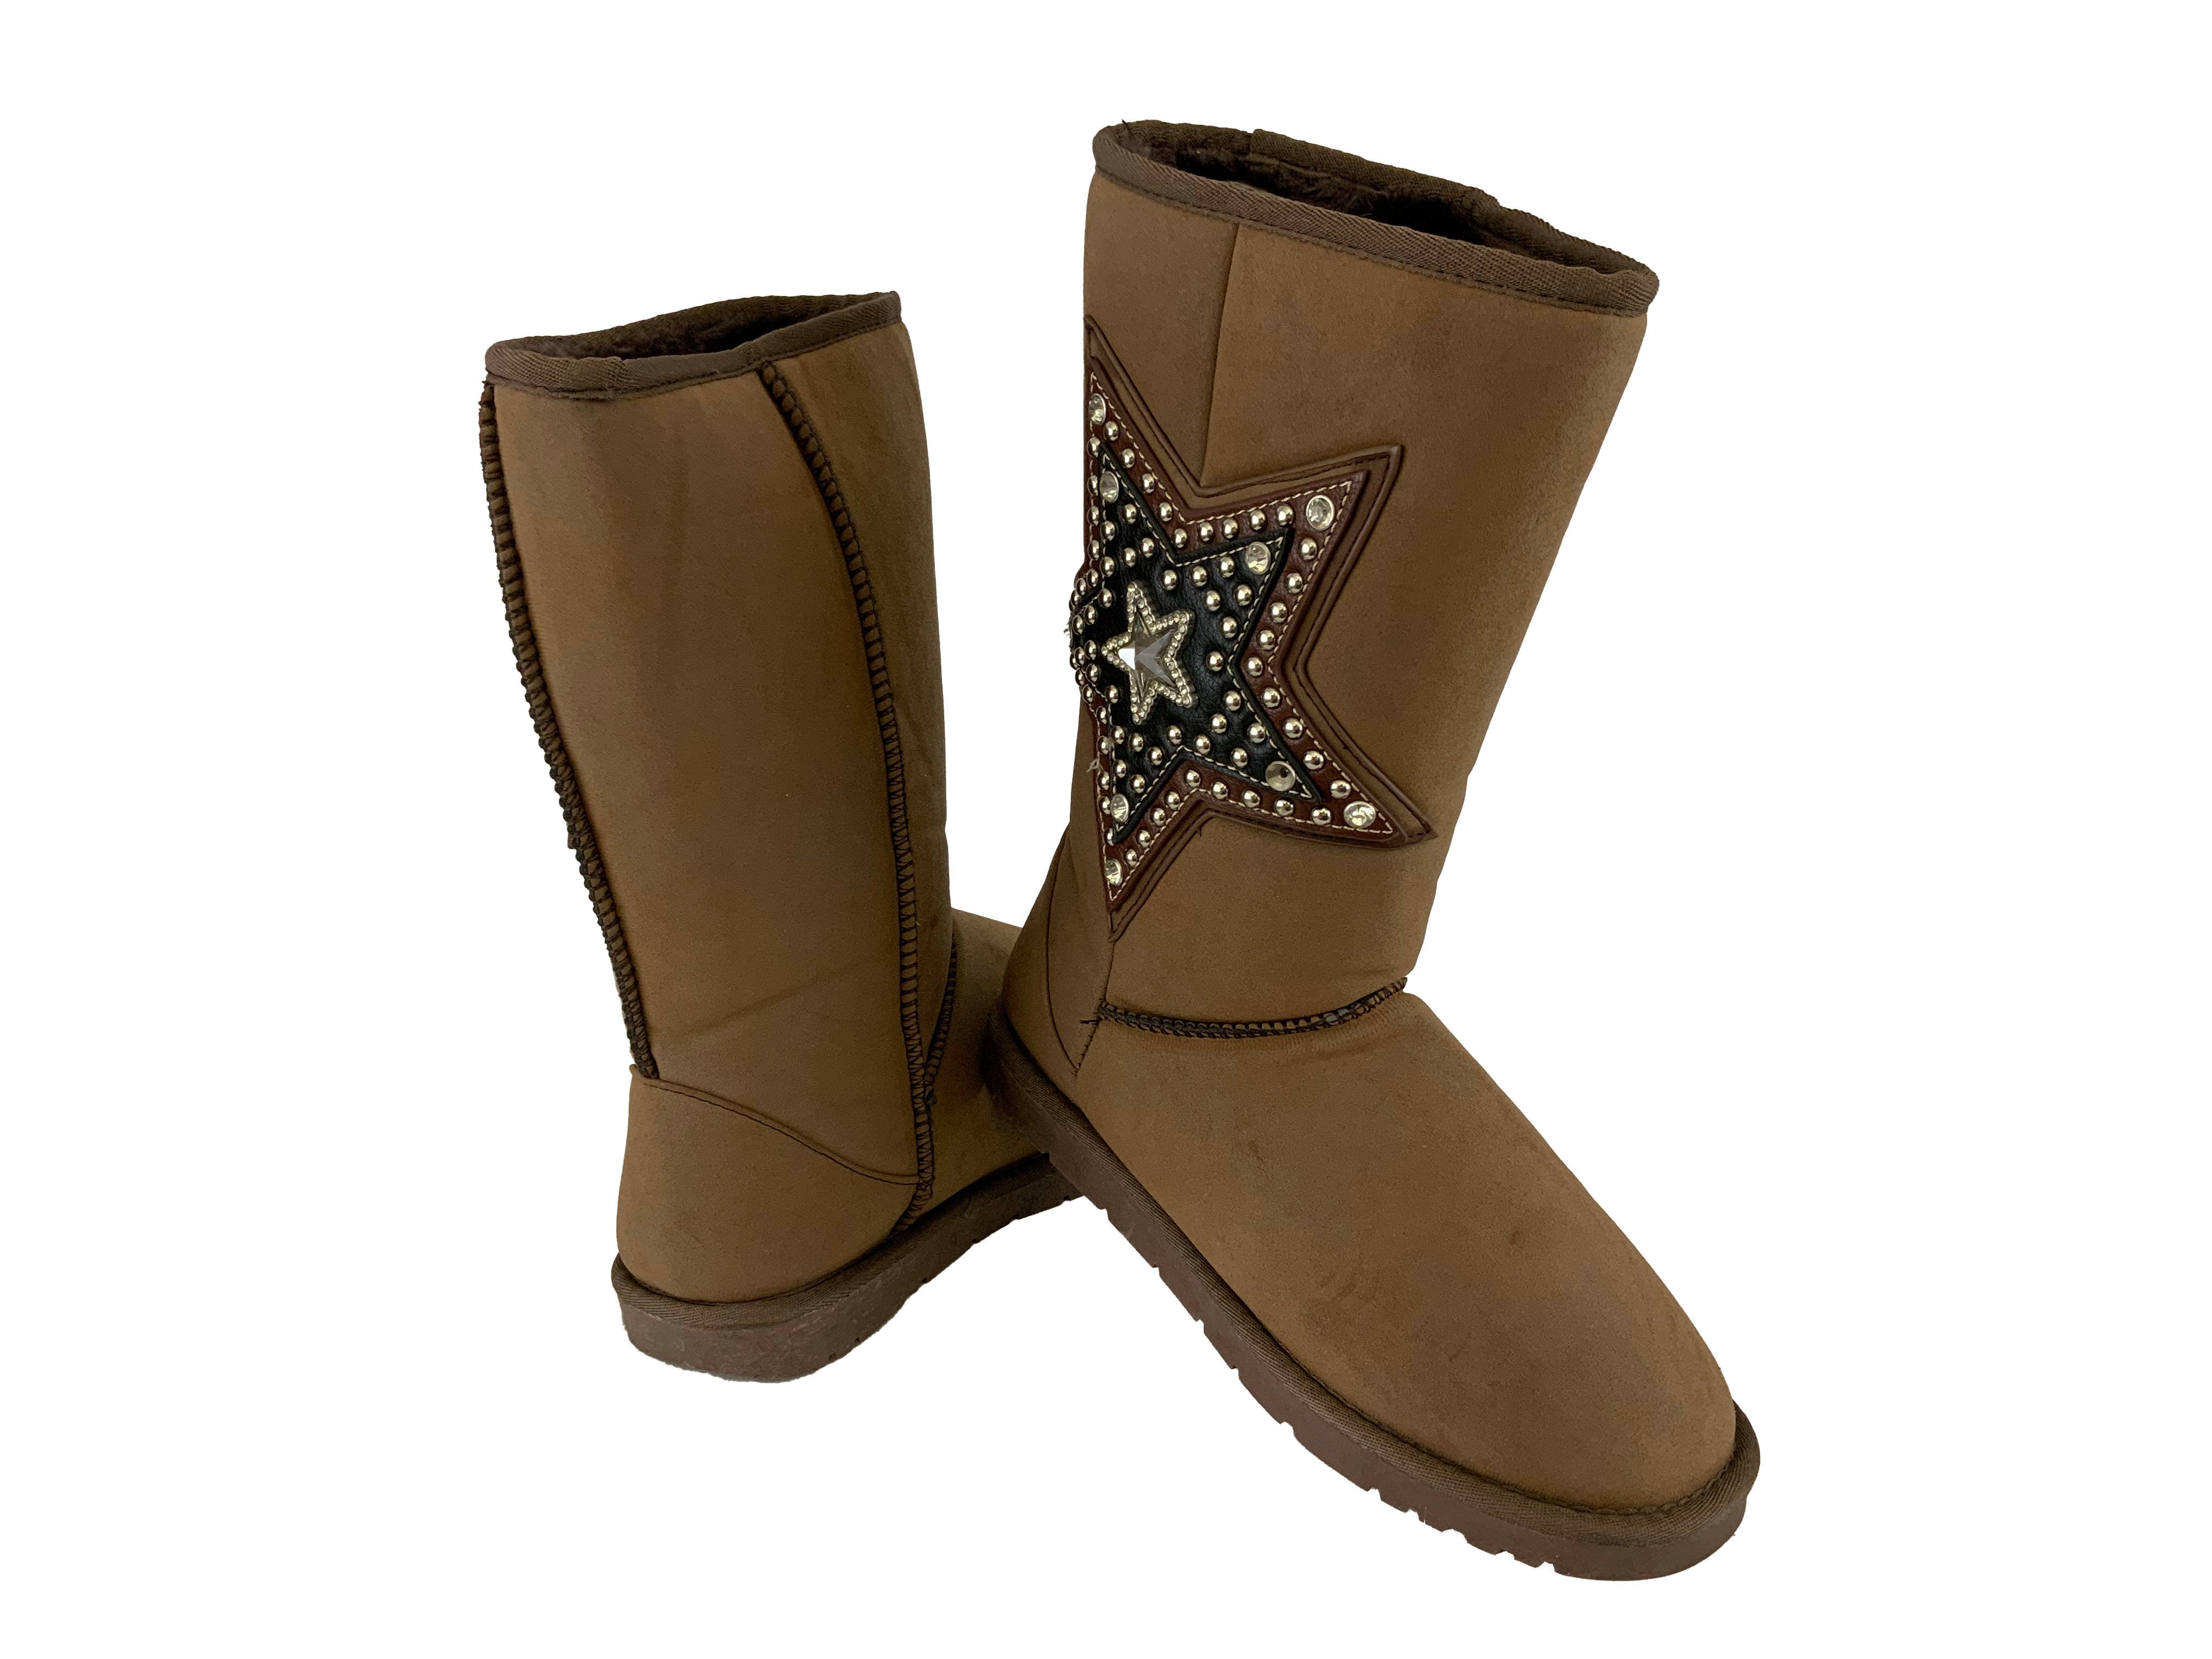 BA3338-C: Mocha suede tall boot with leather star and rhinestones Primary Showman Saddles and Tack   